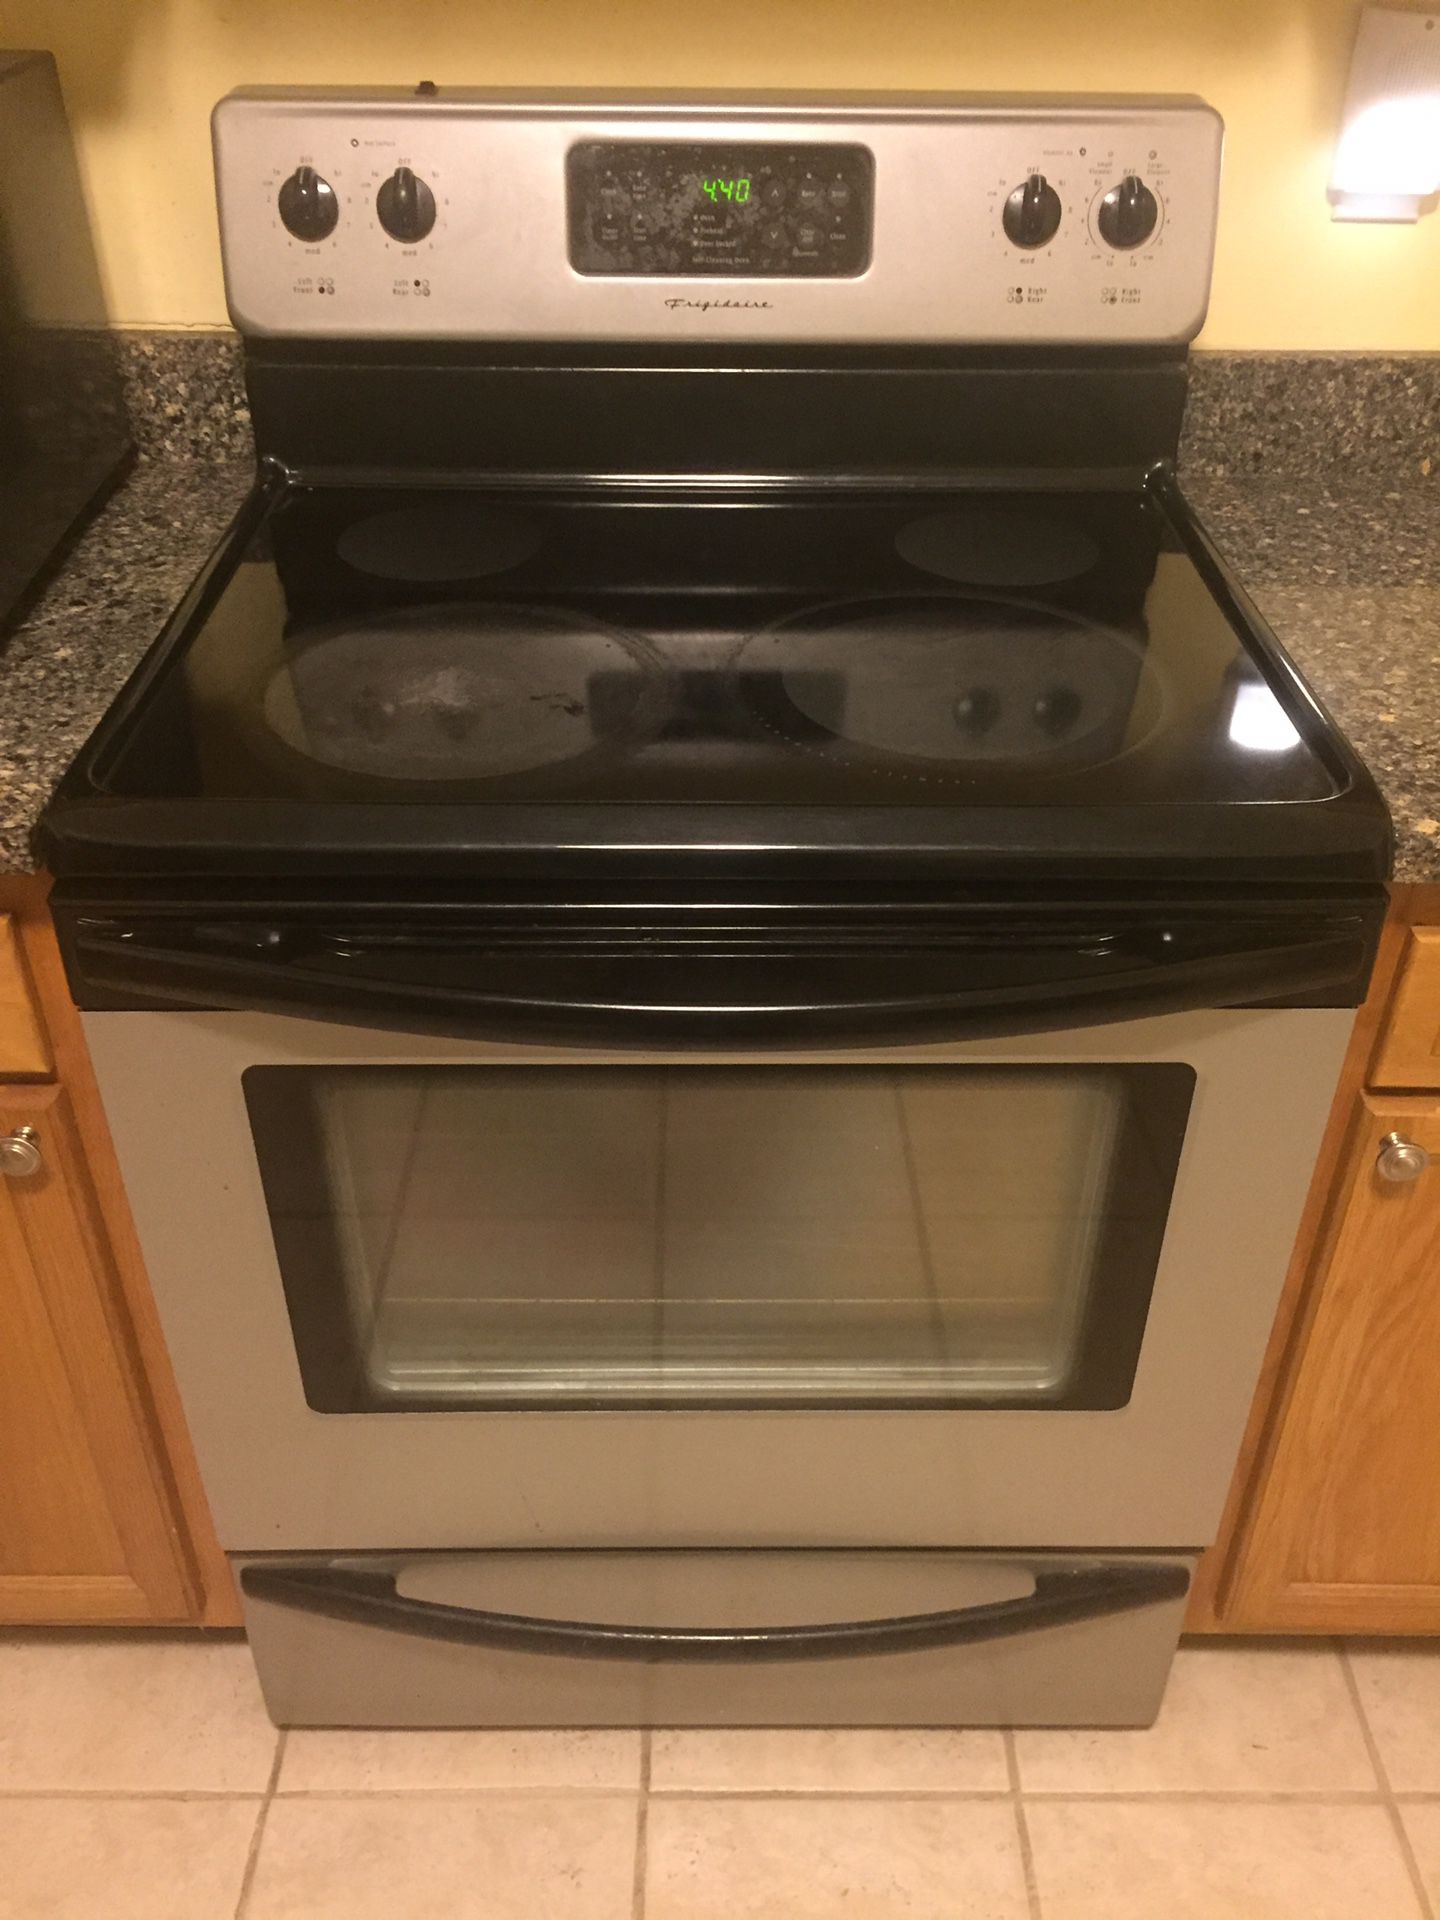 Stove and Microwave